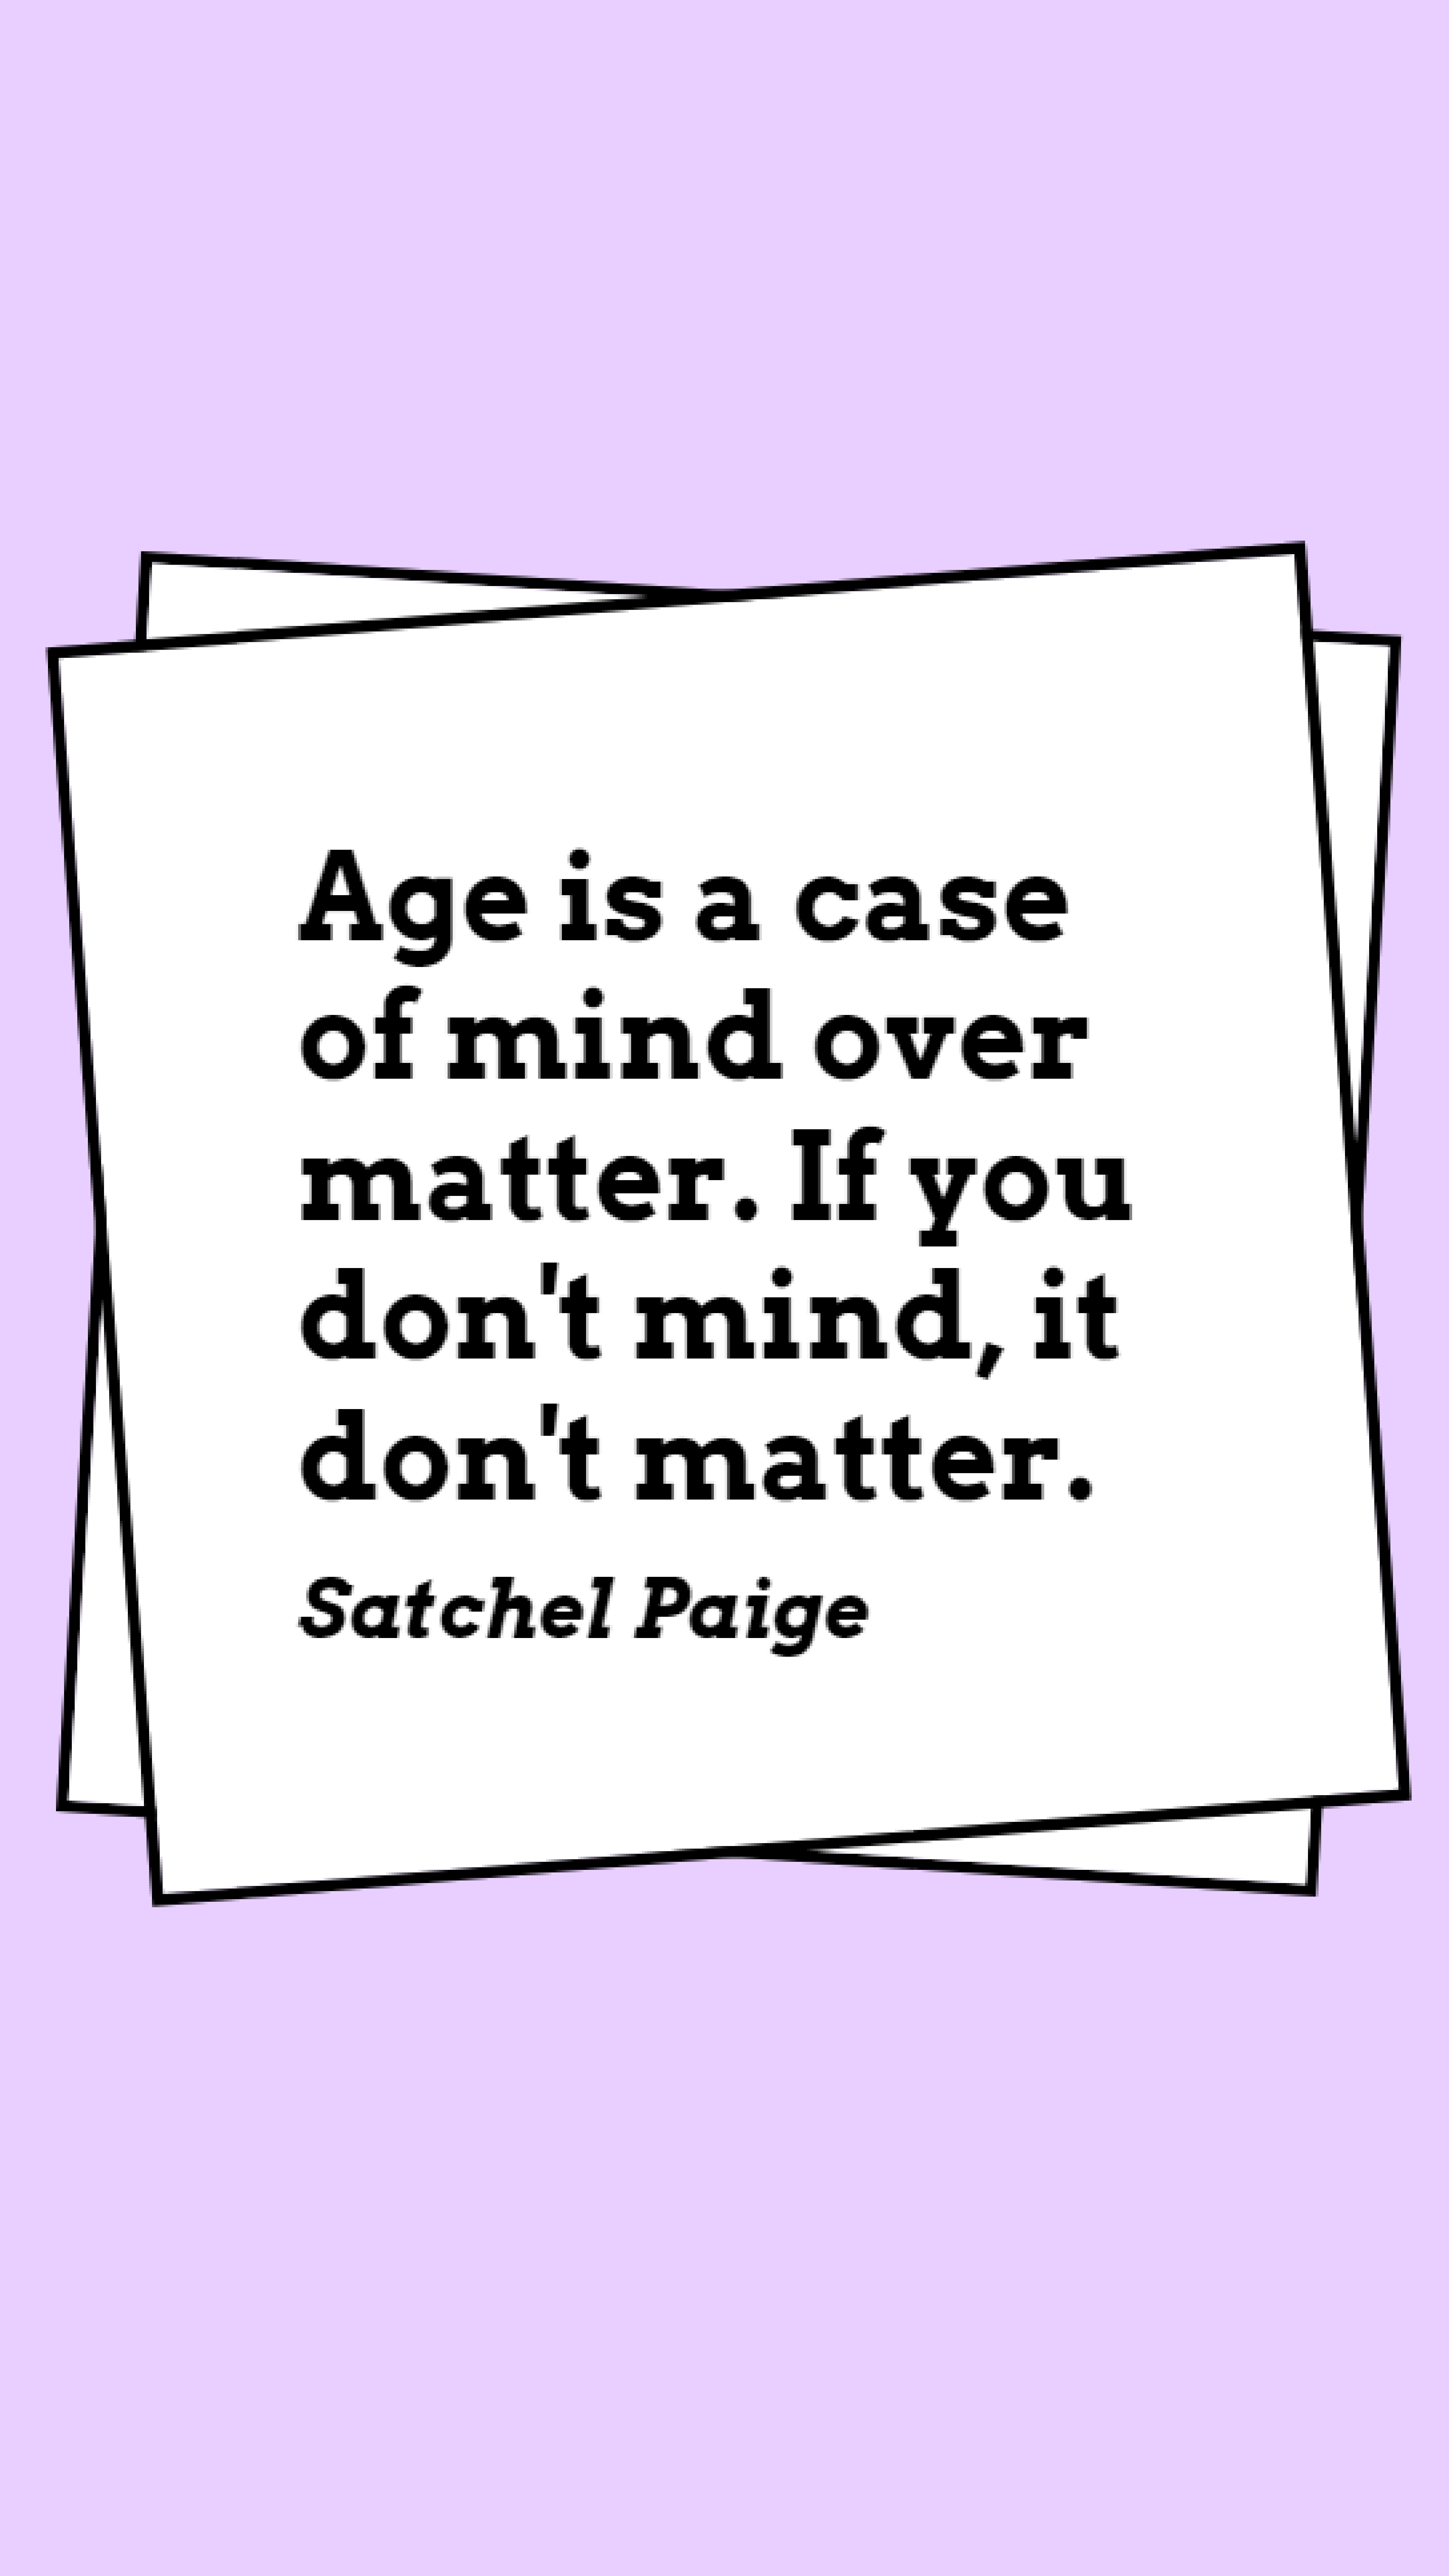 Free Satchel Paige - Age is a case of mind over matter. If you don't